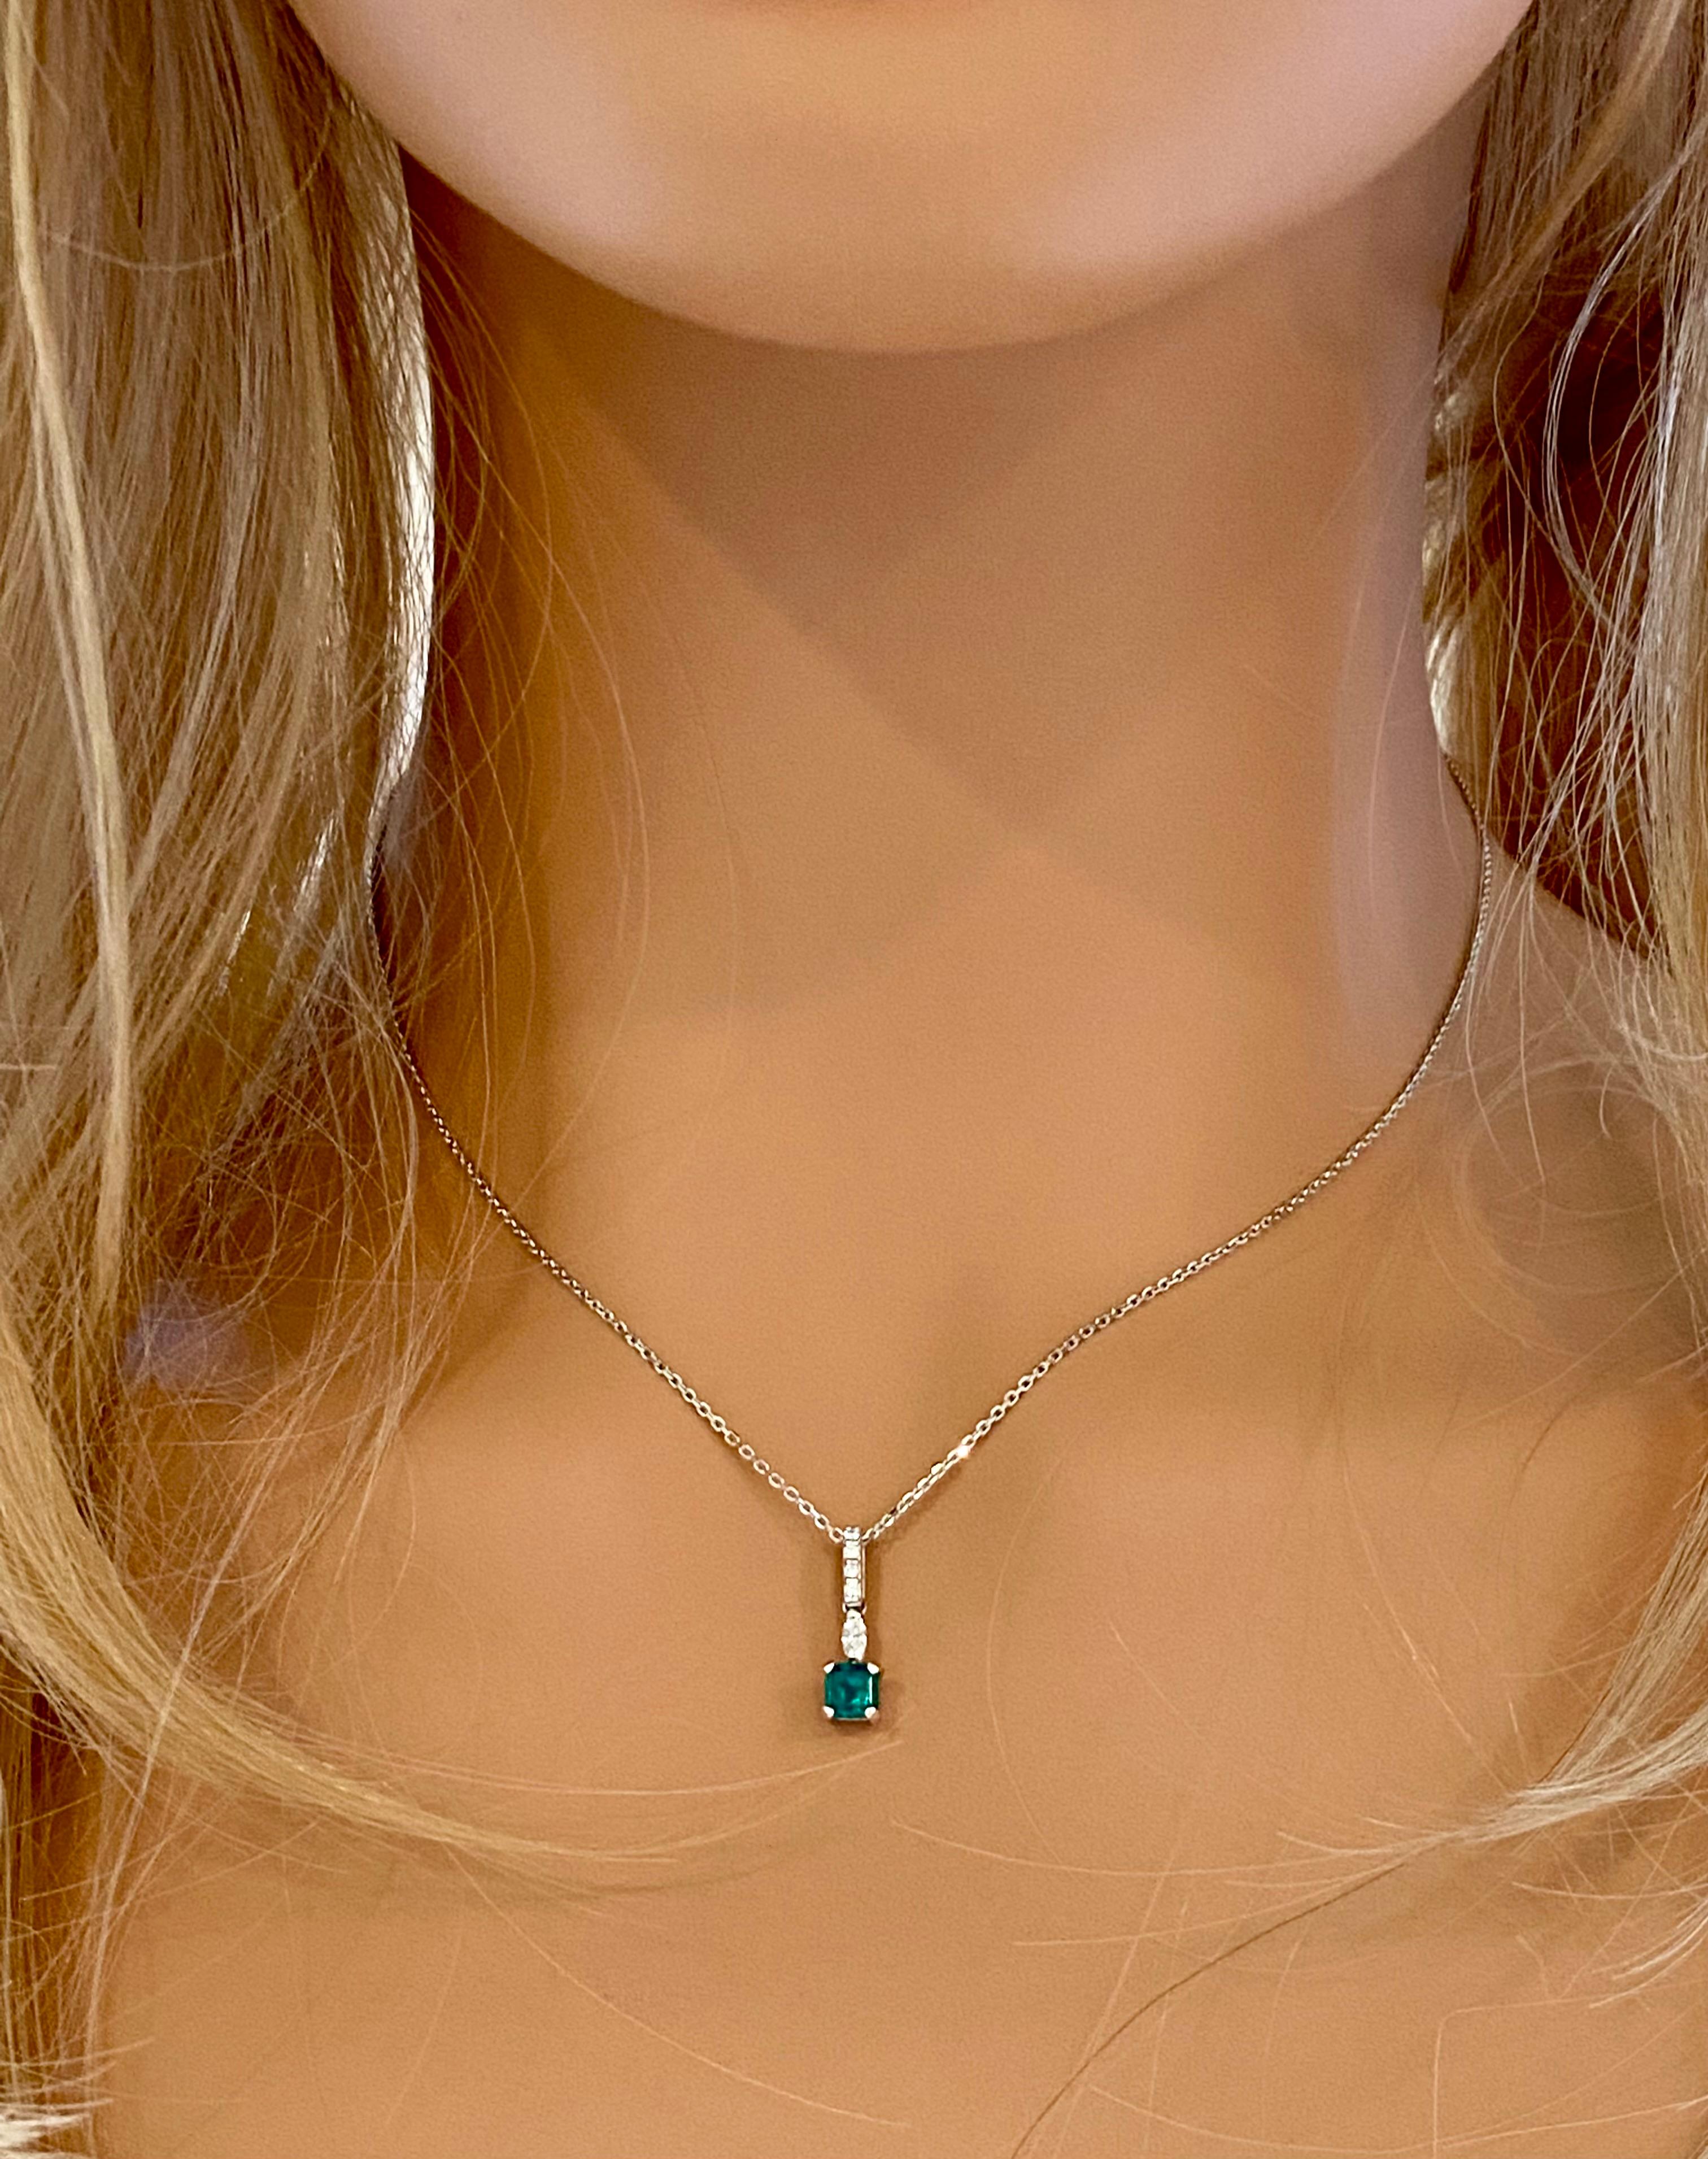 14 karats white gold necklace pendant with emerald-shaped emerald
Necklace measuring 18 inches long
Colombia emerald-cut emerald  weighing 0.90 carats
One marquise diamond weighing 0.10 carats
Diamond bail weighing 0.09 carats
Emerald color hue is